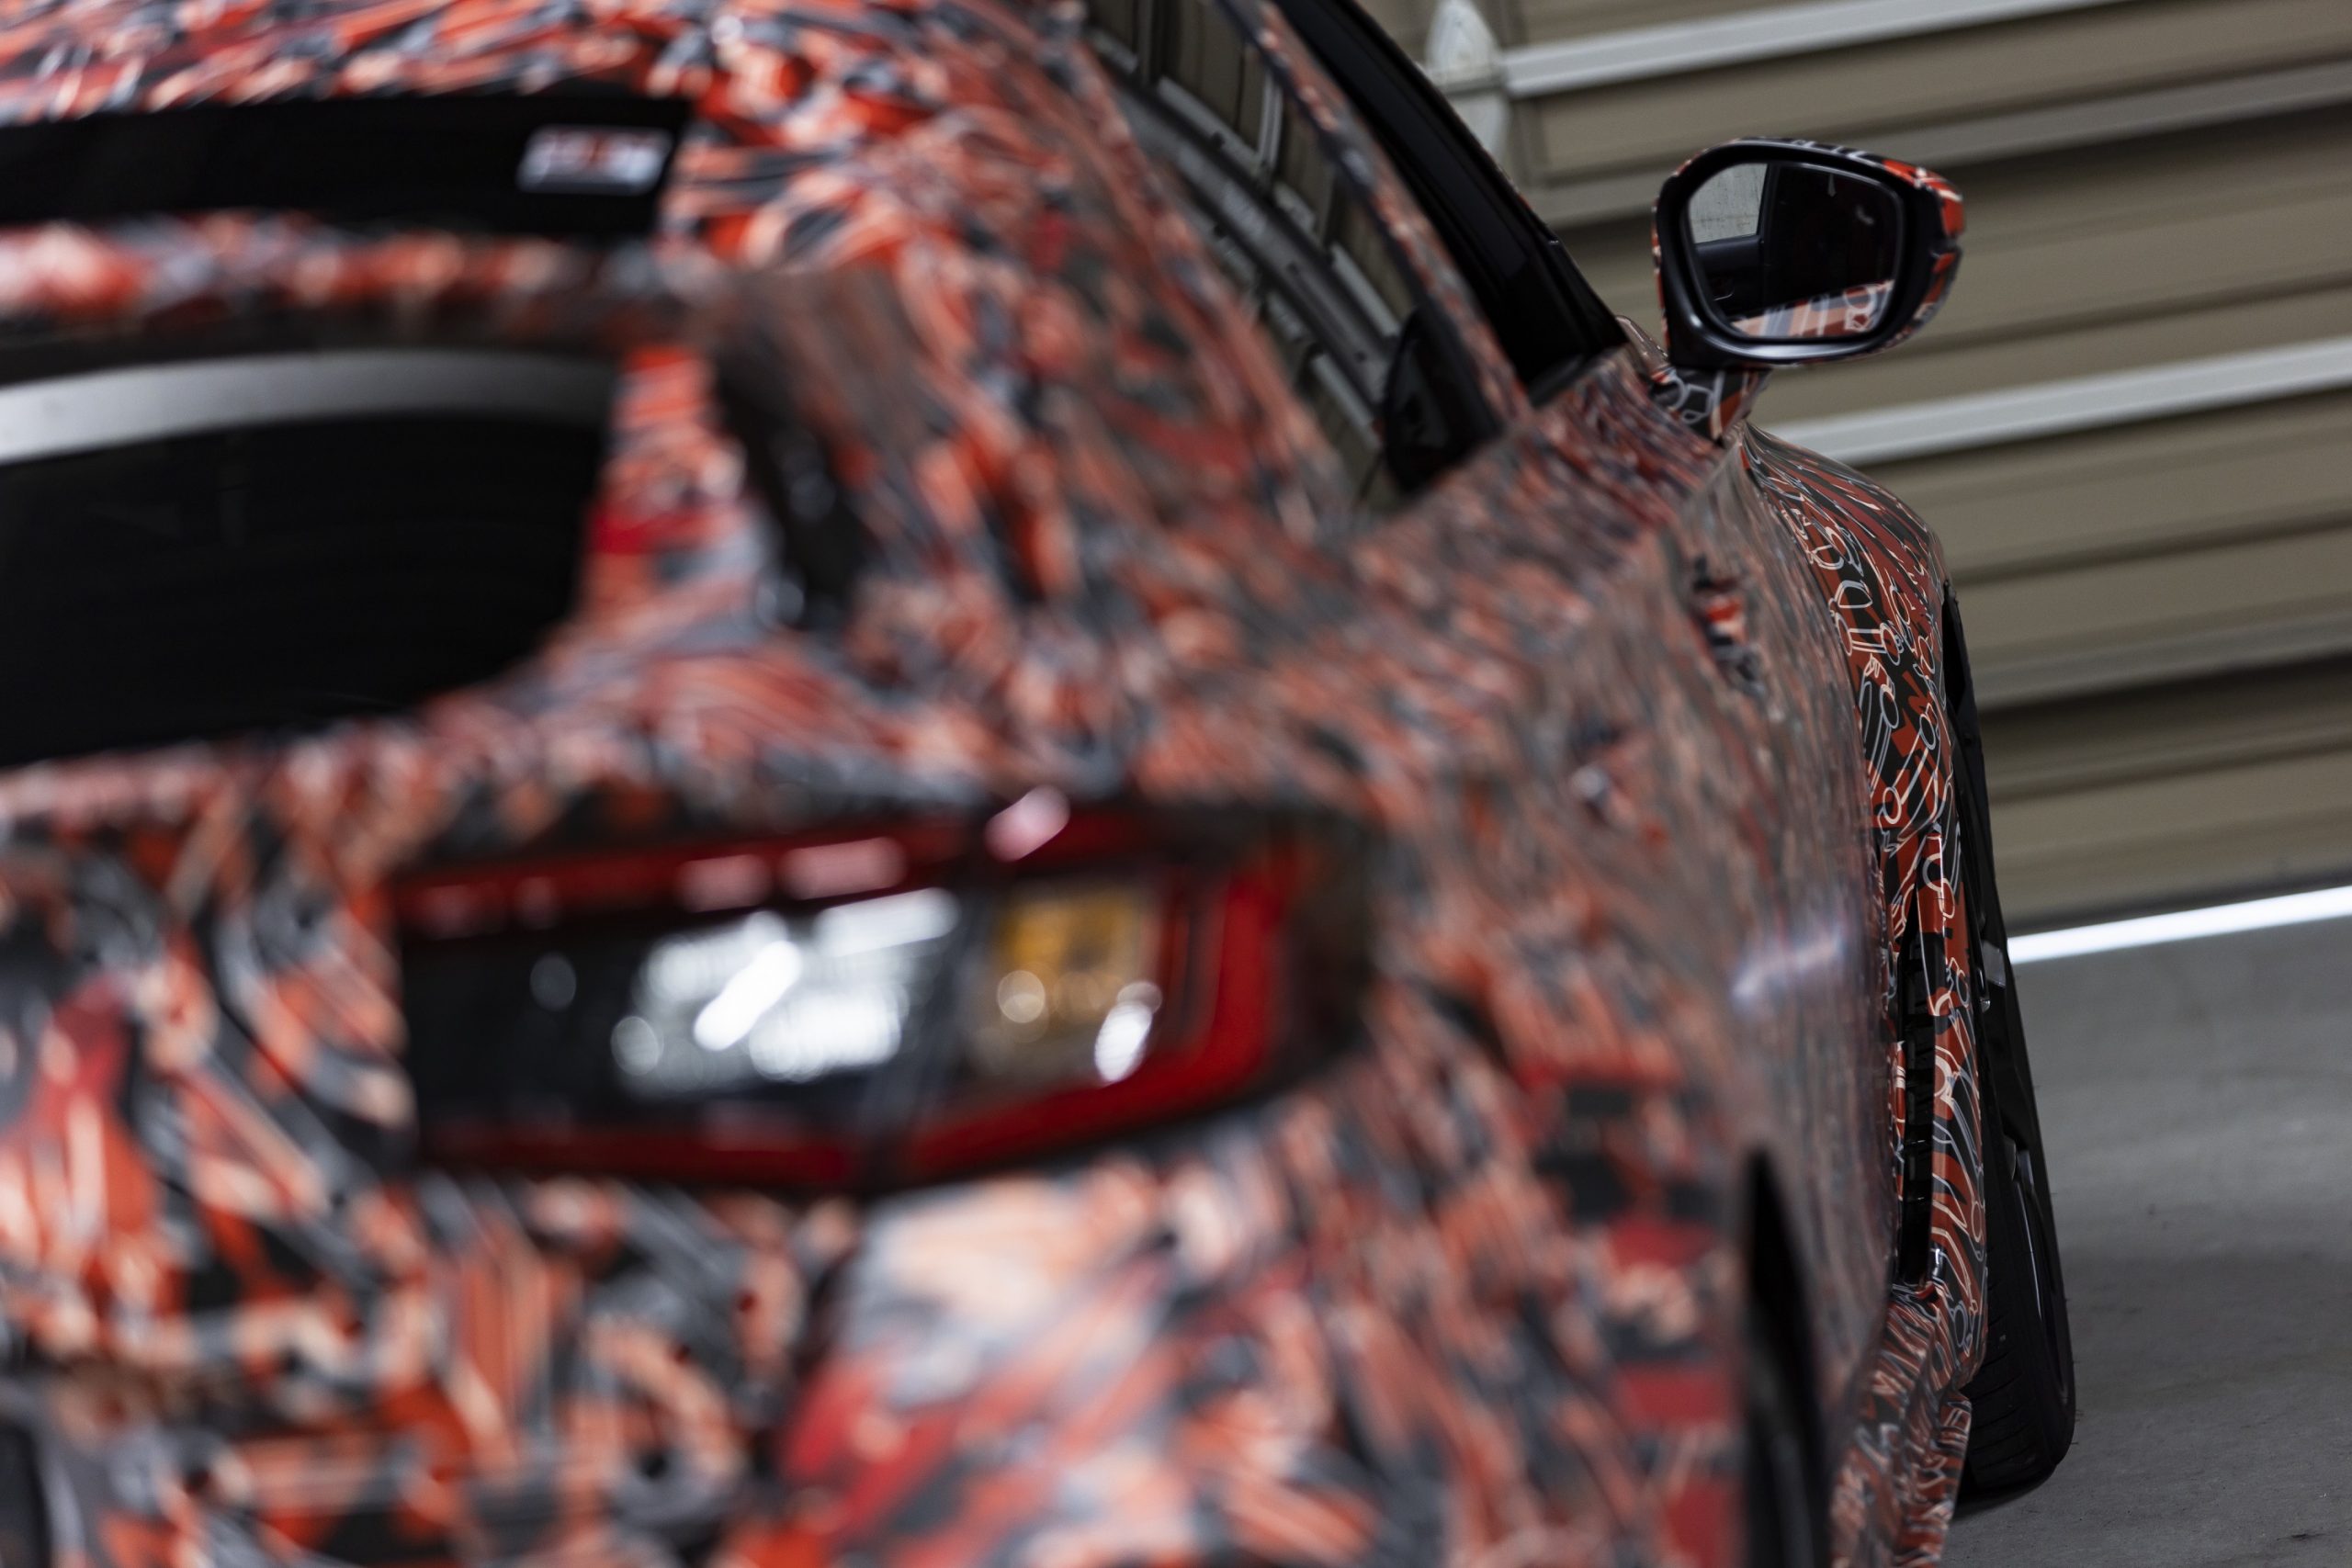 A tight shot down the side of the new Civic Type R hot hatch with a camo livery